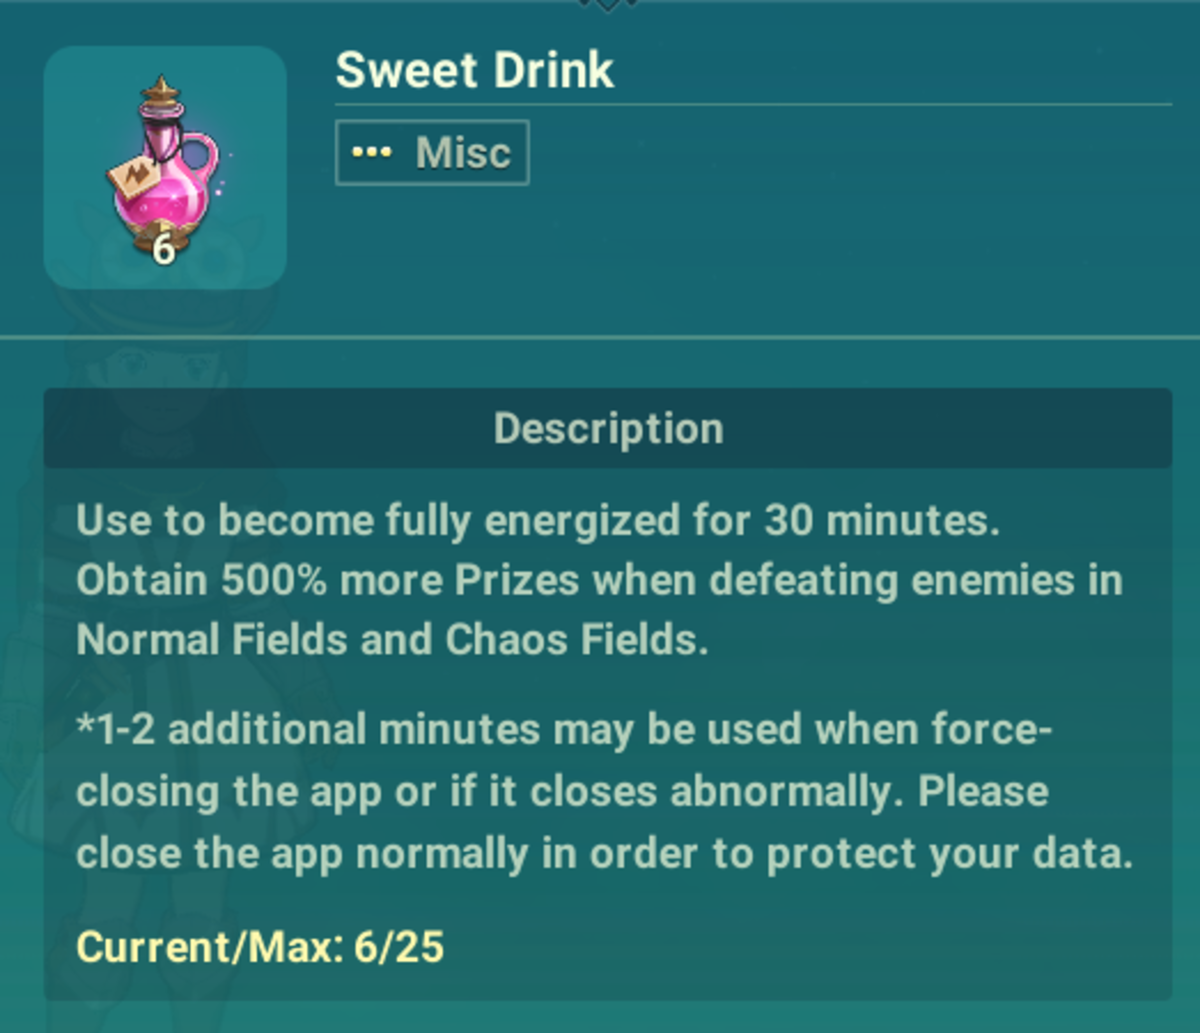 Sweet Drink gives a 500% increase.